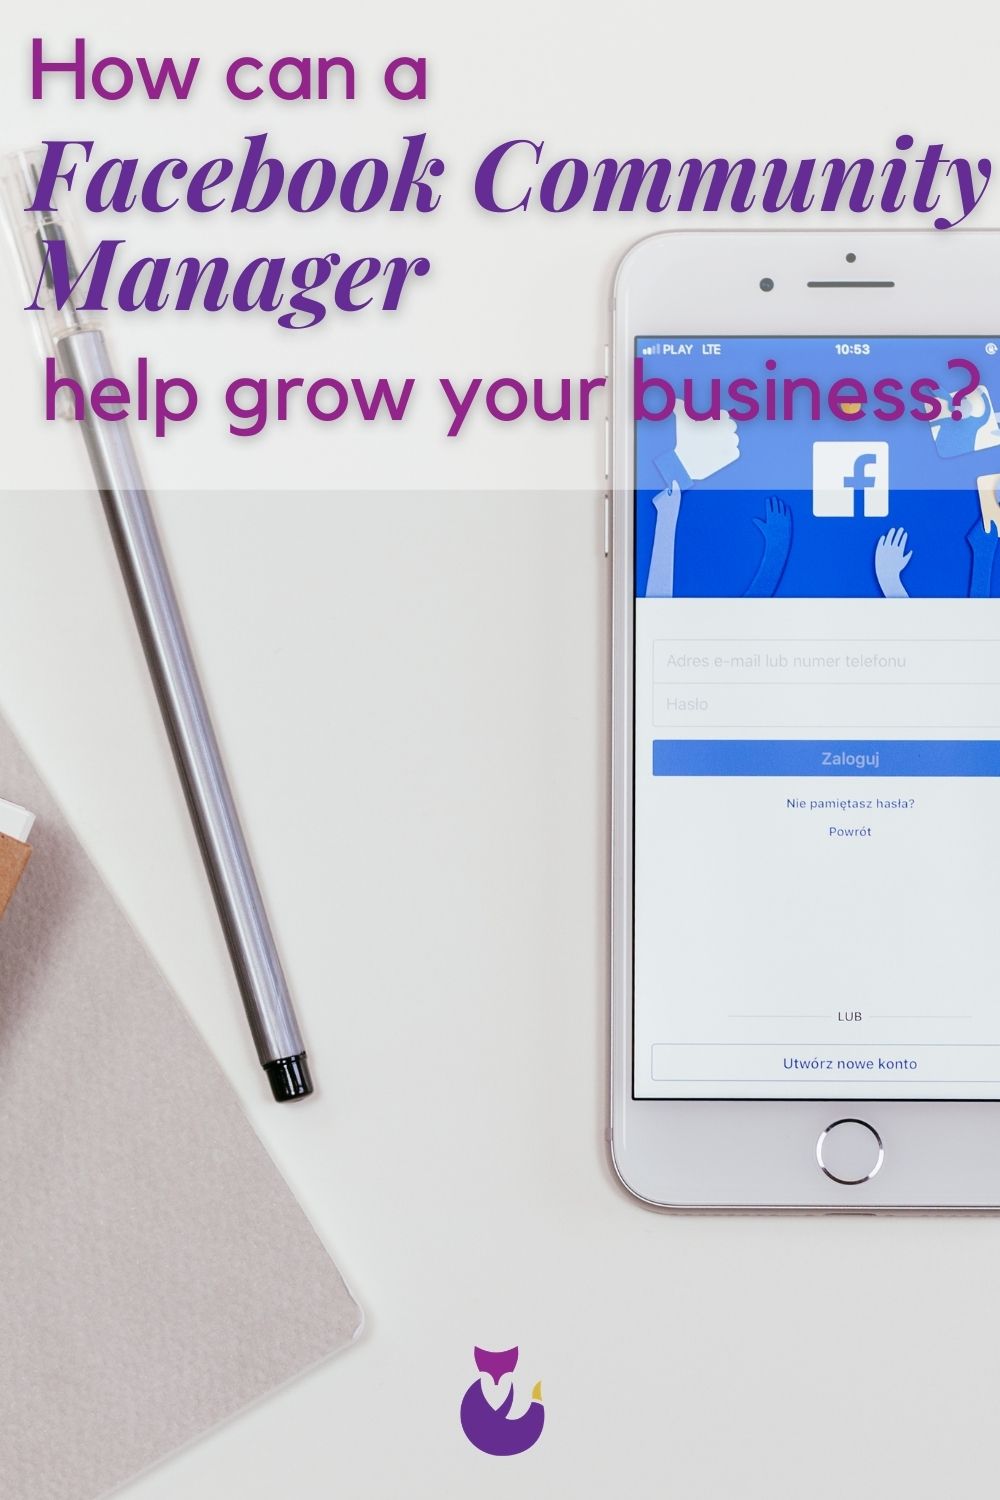 How can a Facebook Community Manager help grow your business?